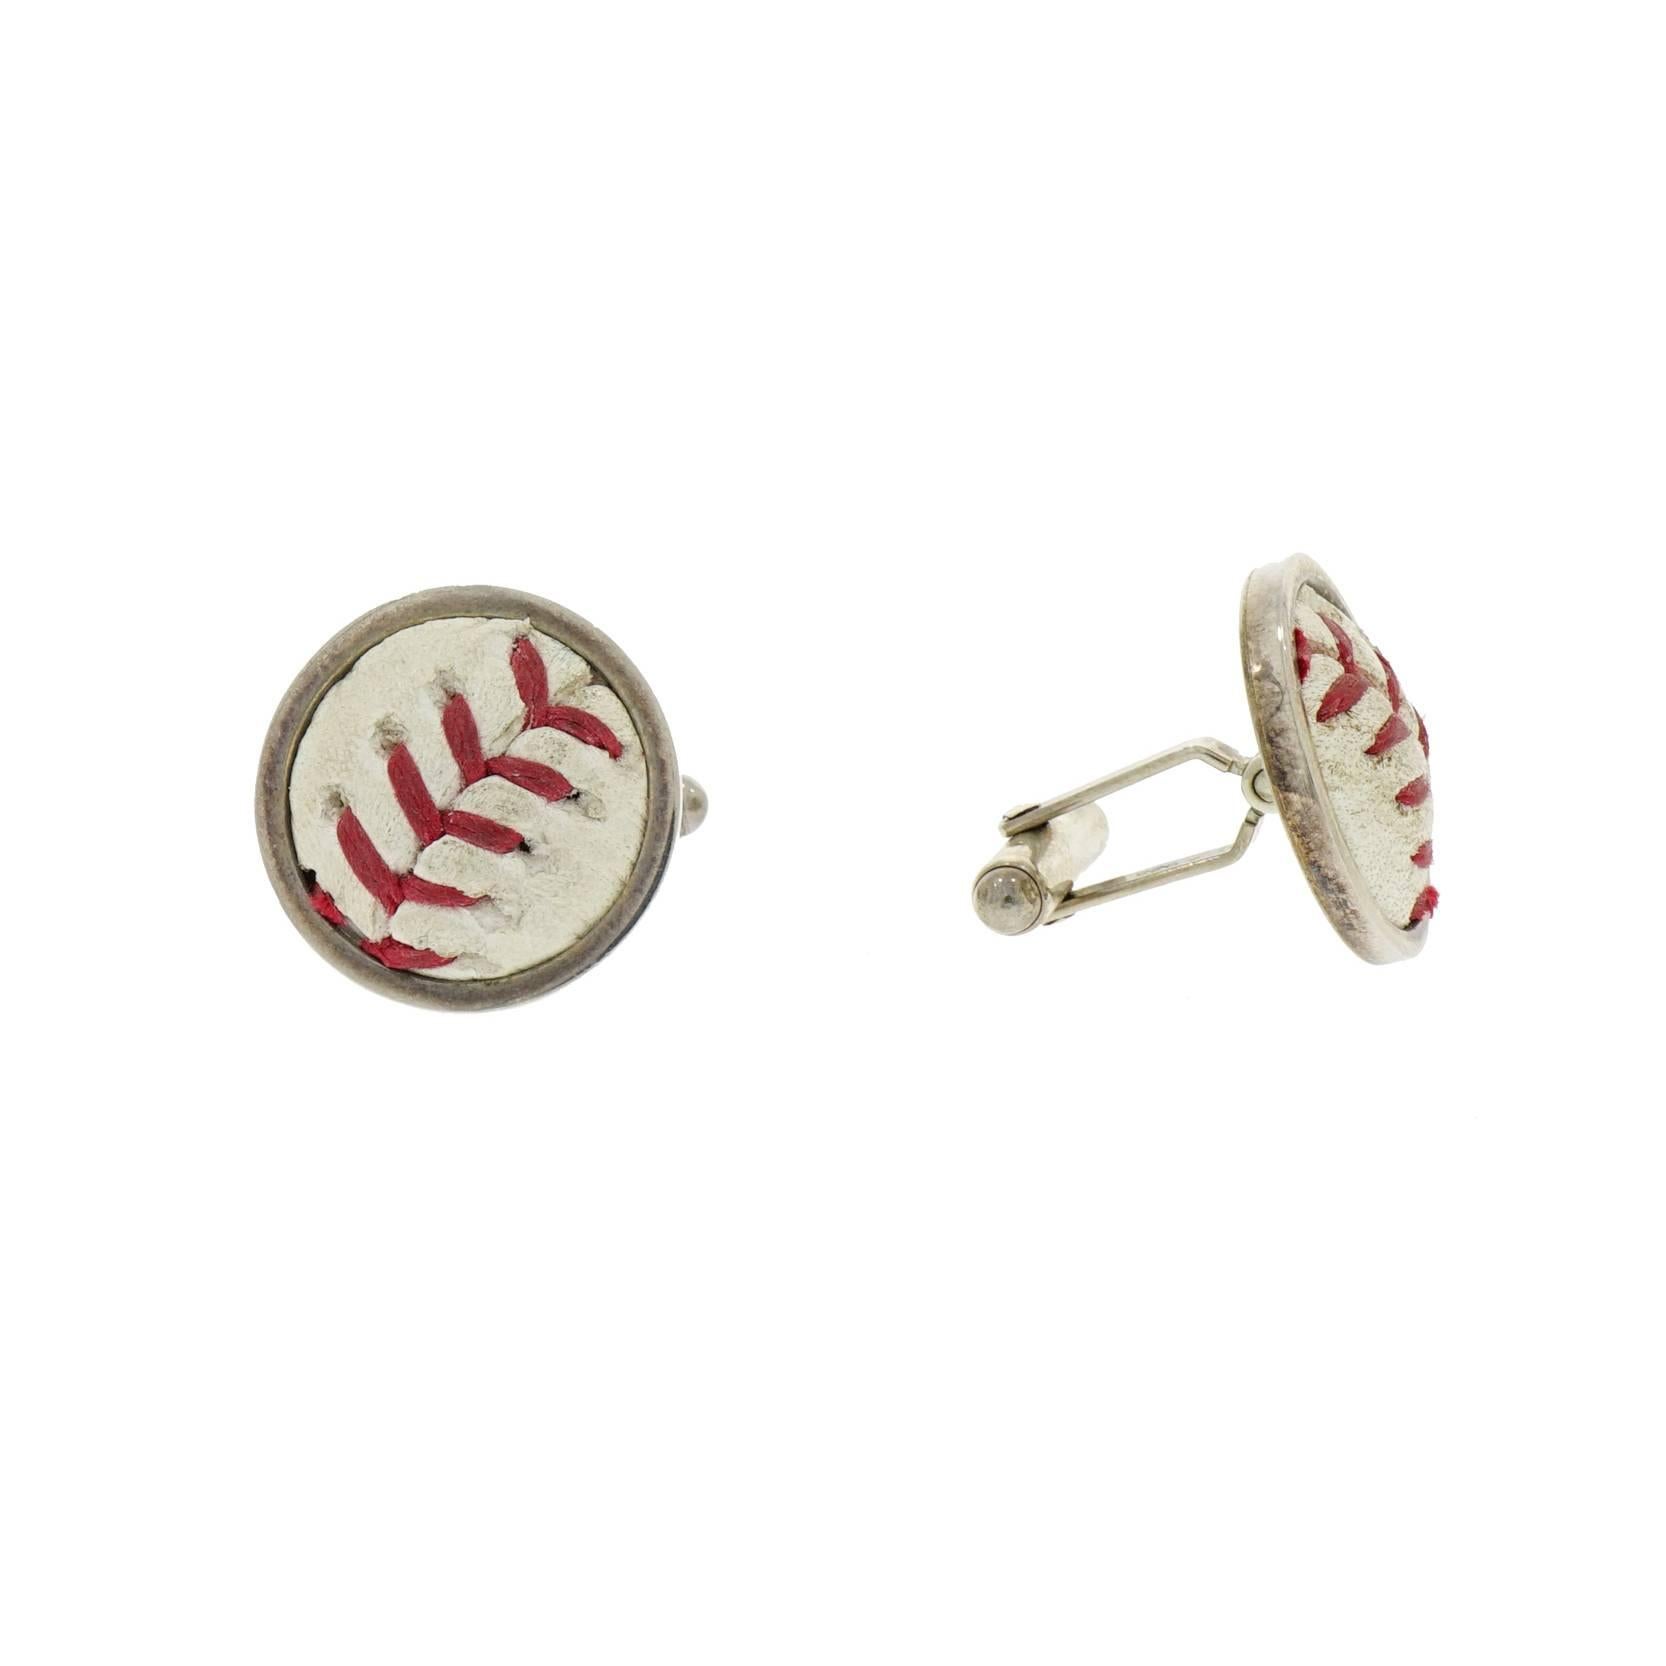 These cufflinks will definitely add a spin to your formal wear. They're made from The Mets baseball that earned their scuffs and marks on the field. 
The back of the cufflinks features the hallmark of the Mets and a hologram of the game recorded by